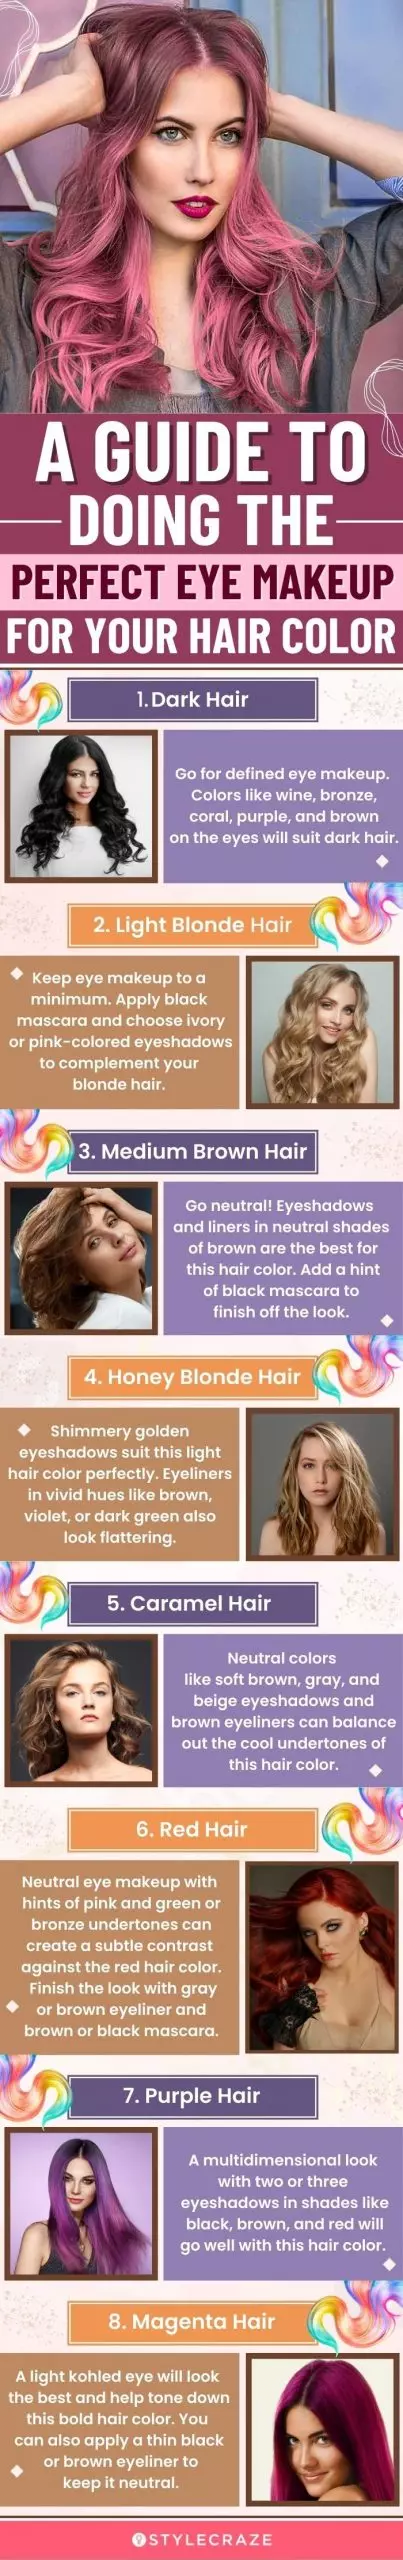 a guide to doing the perfect eye makeup for your hair color (infographic)